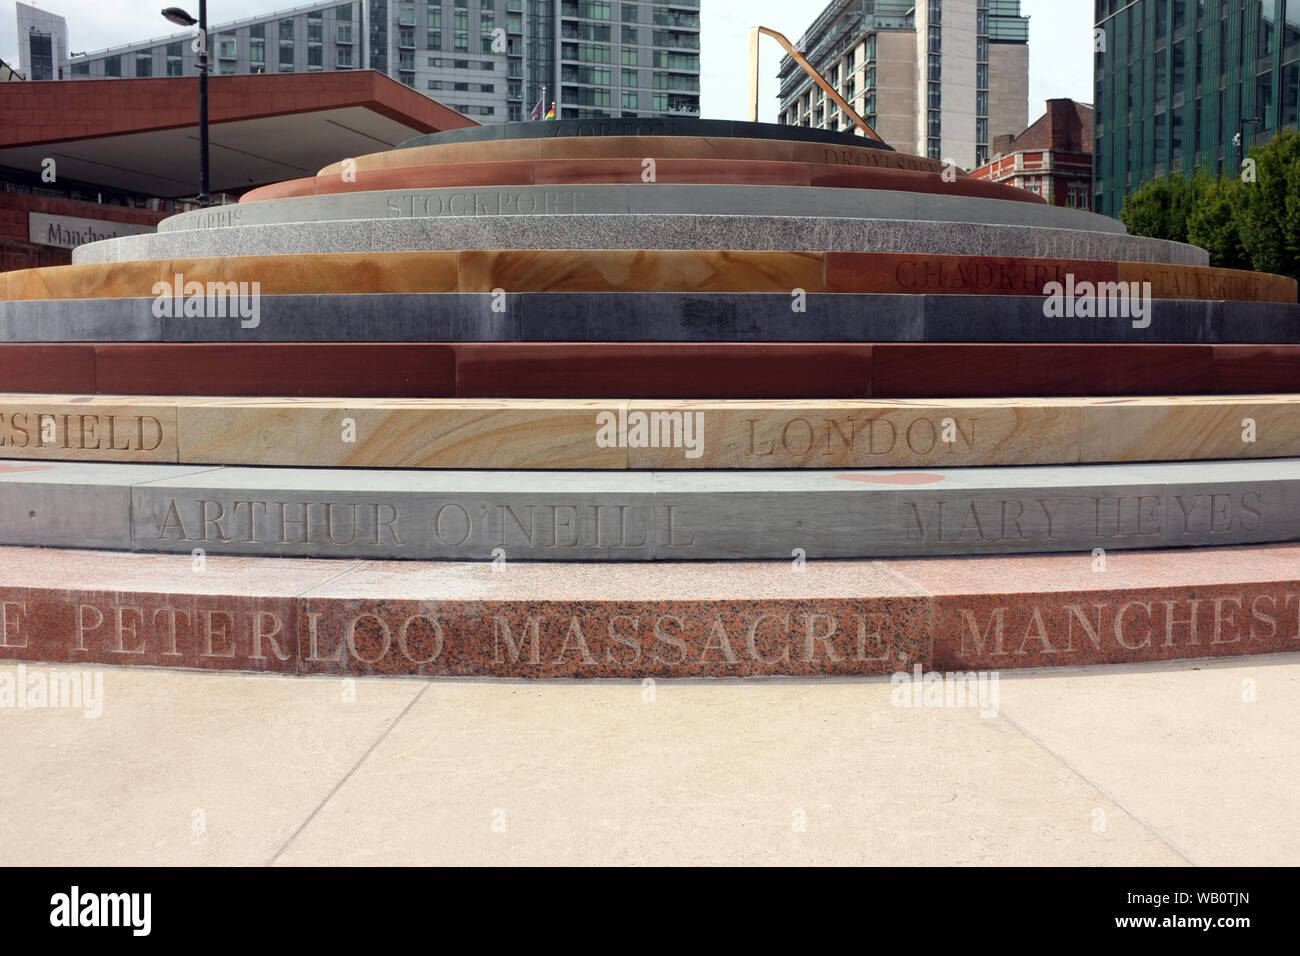 The Peterloo Memorial artwork commemorating the dead and injured at the Peterloo massacre on St Peter's Field, Central Manchester UK. photo DON TONGE Stock Photo